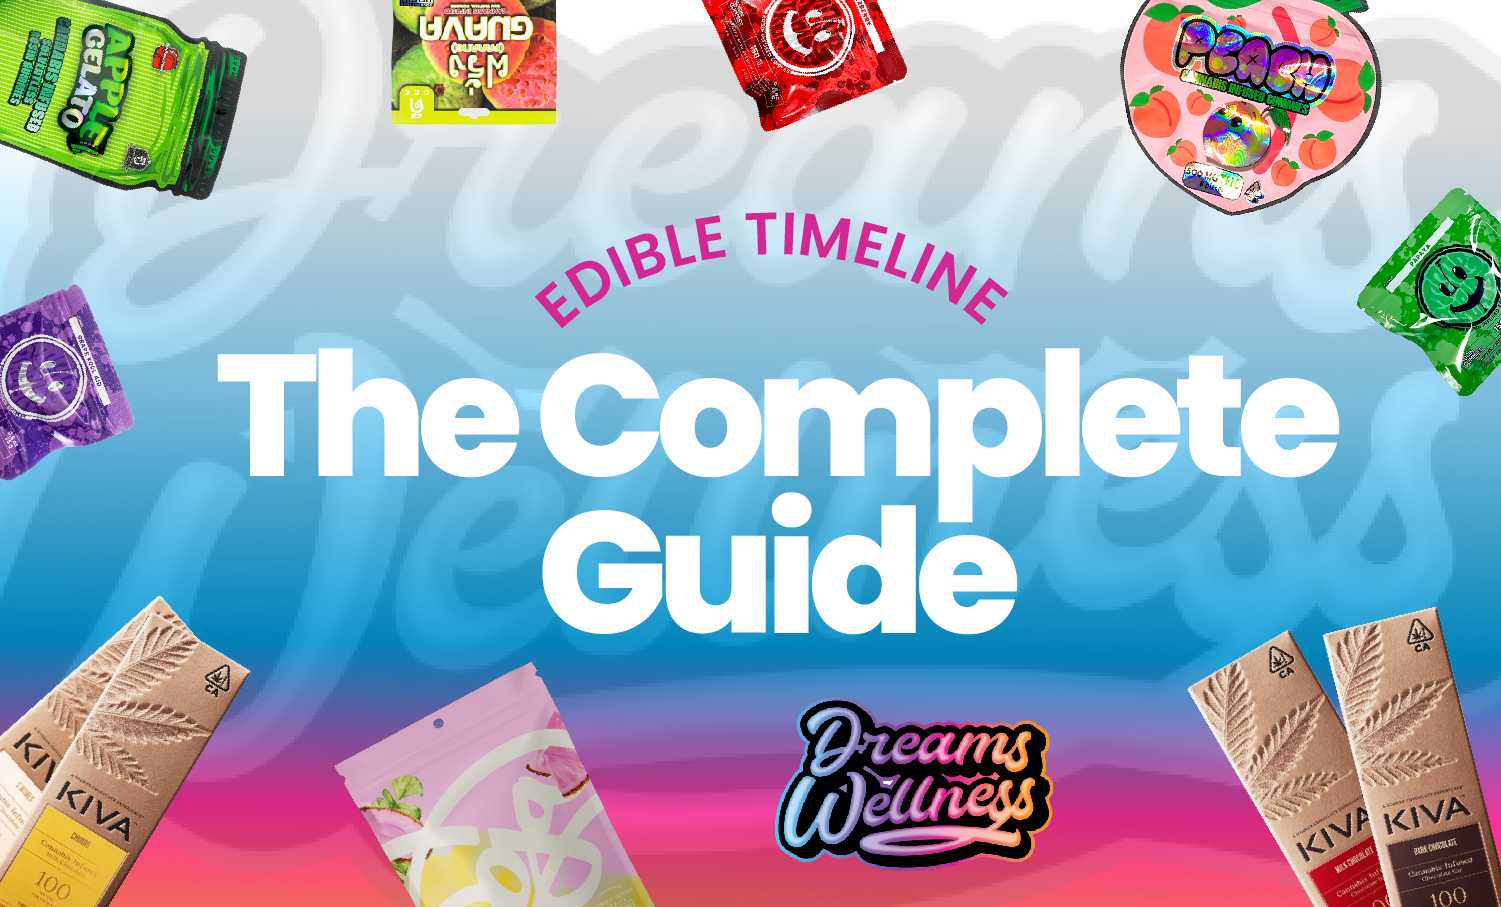 Edible Timeline -The Complete Guide